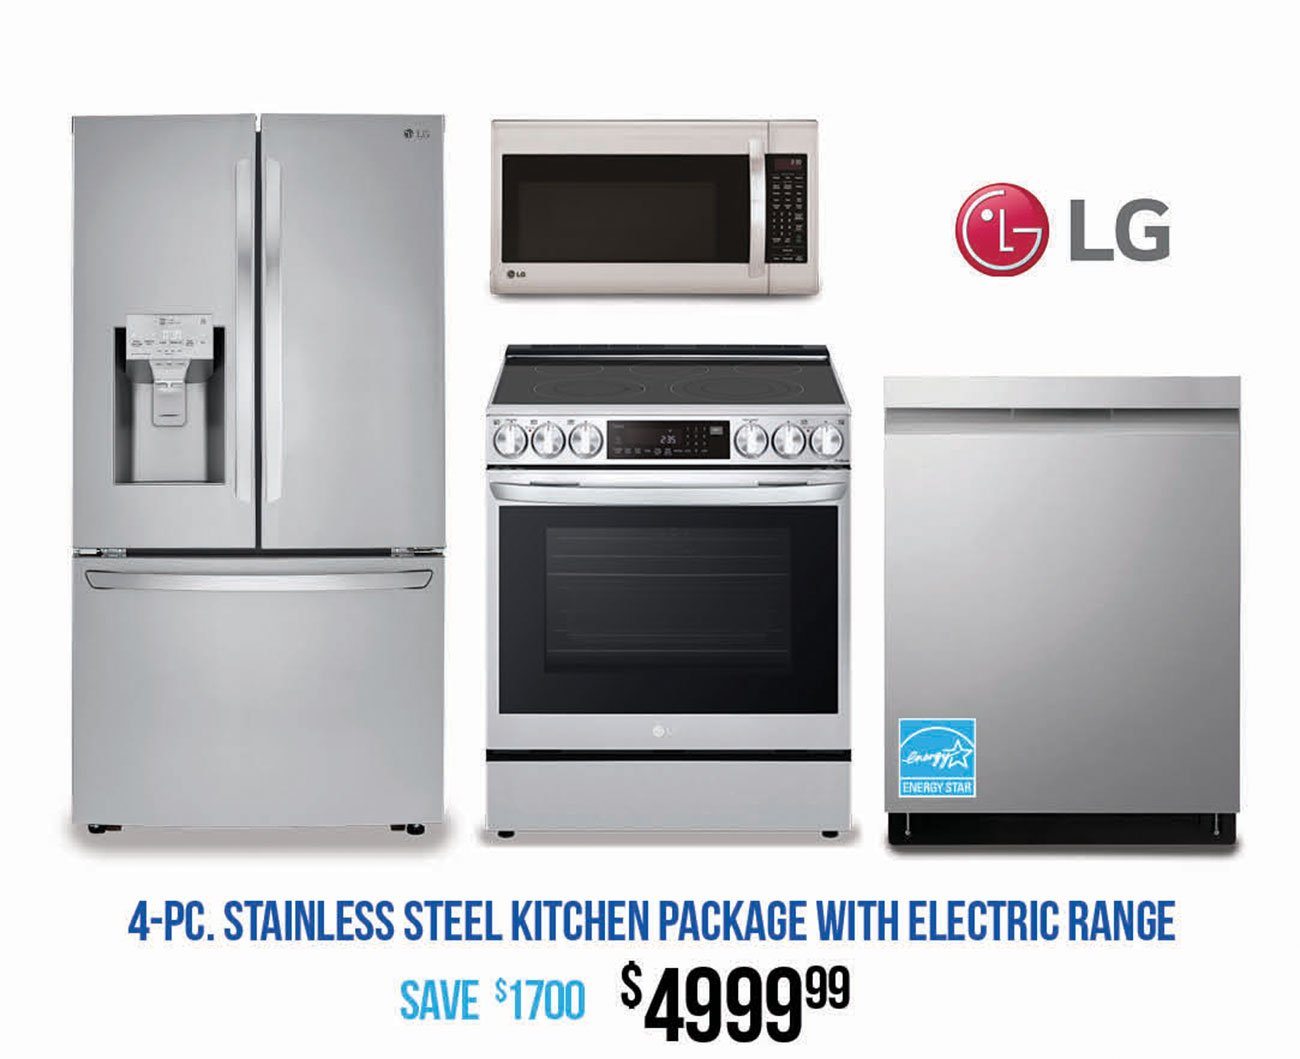 LG-Stainless-Steel-Kitchen-Package-With-Electric-Range-UIRV